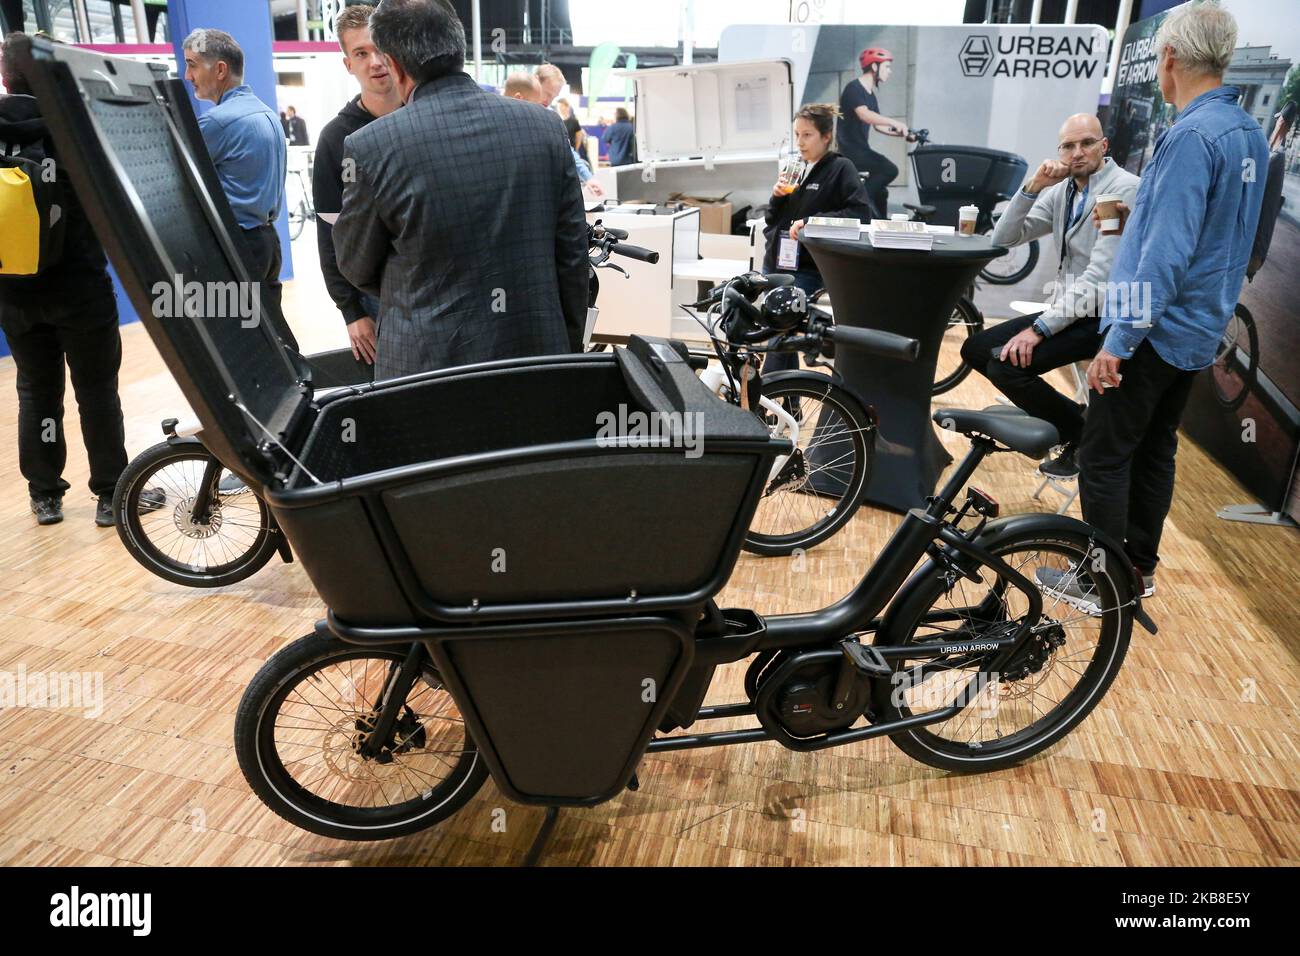 The Dutch manufacturer Urban Arrow exhibits an electric cargo bike at the Autonomy and Urban Mobility show, in Paris on October 16, 2019. (Photo by Michel Stoupak/NurPhoto) Stock Photo